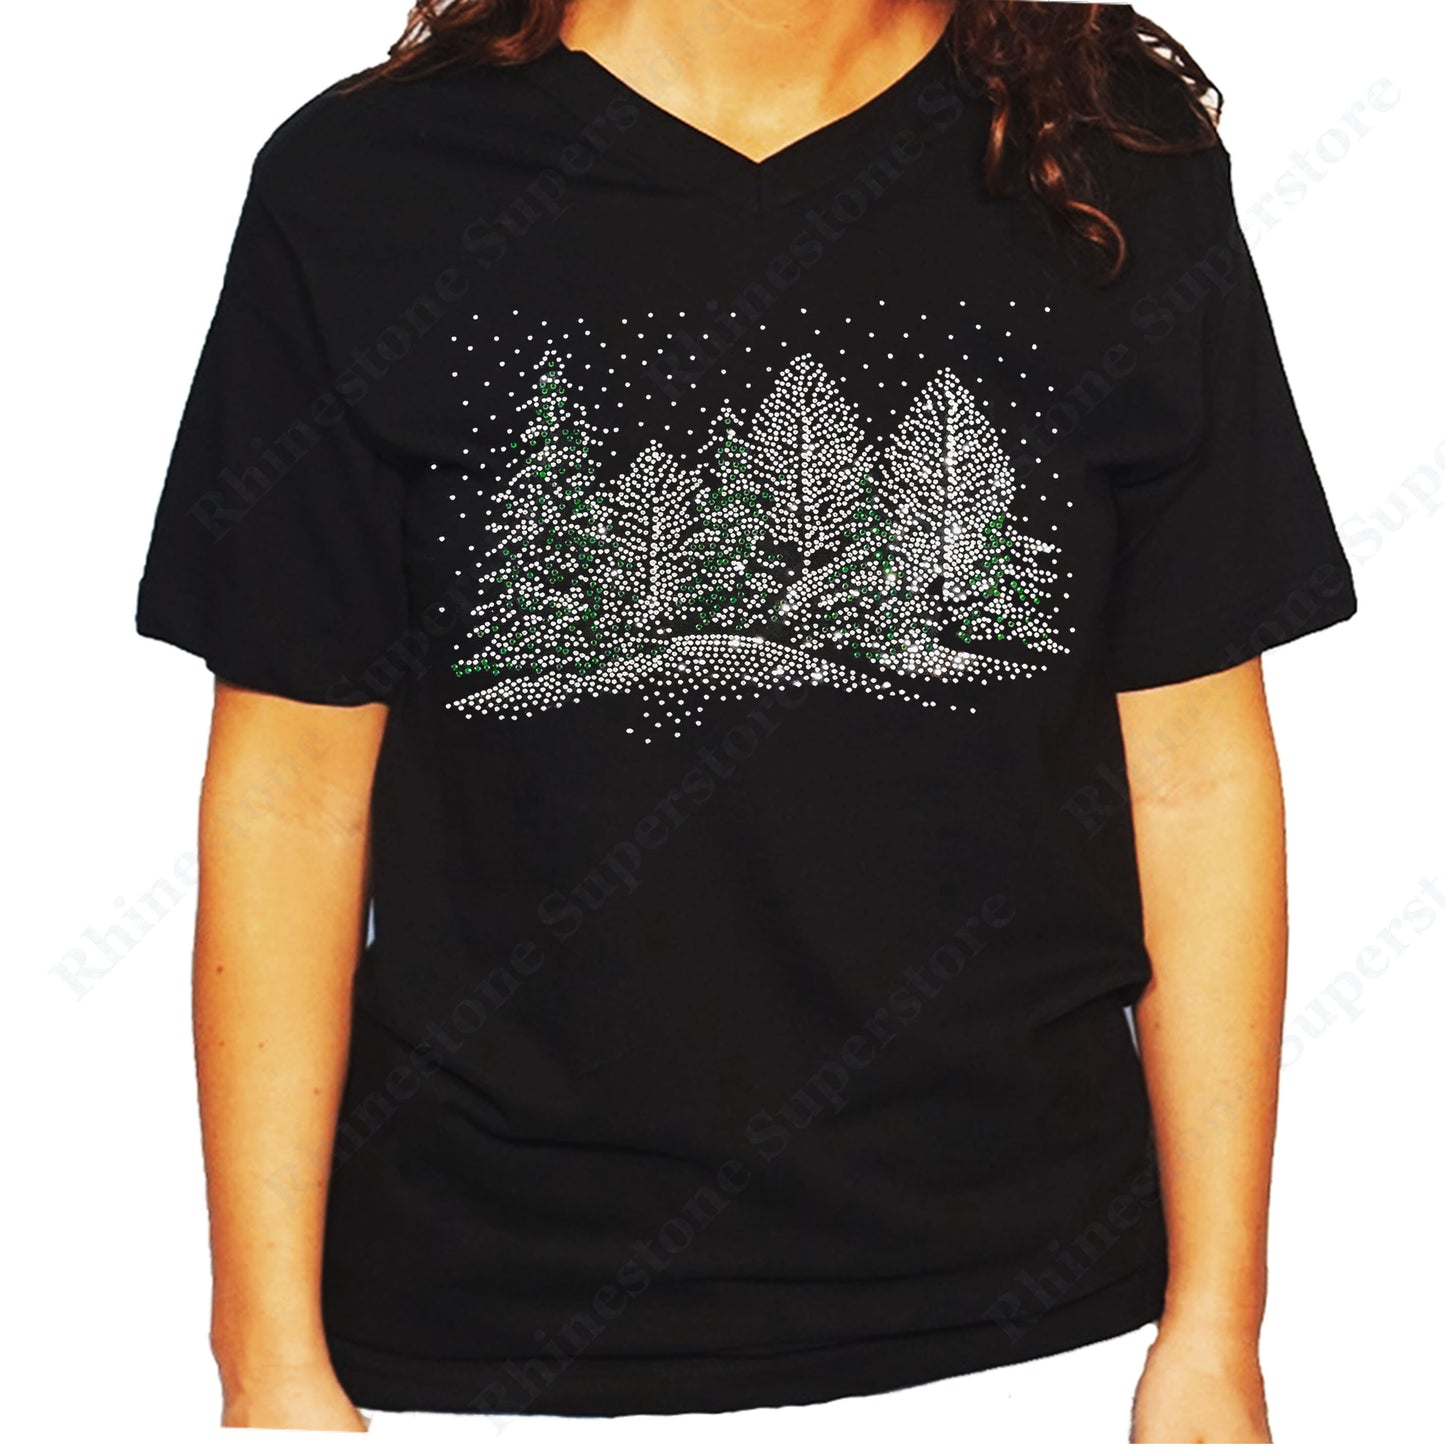 Women's / Unisex T-Shirt with Winter Scene with Snow and Christmas Trees in Rhinestones